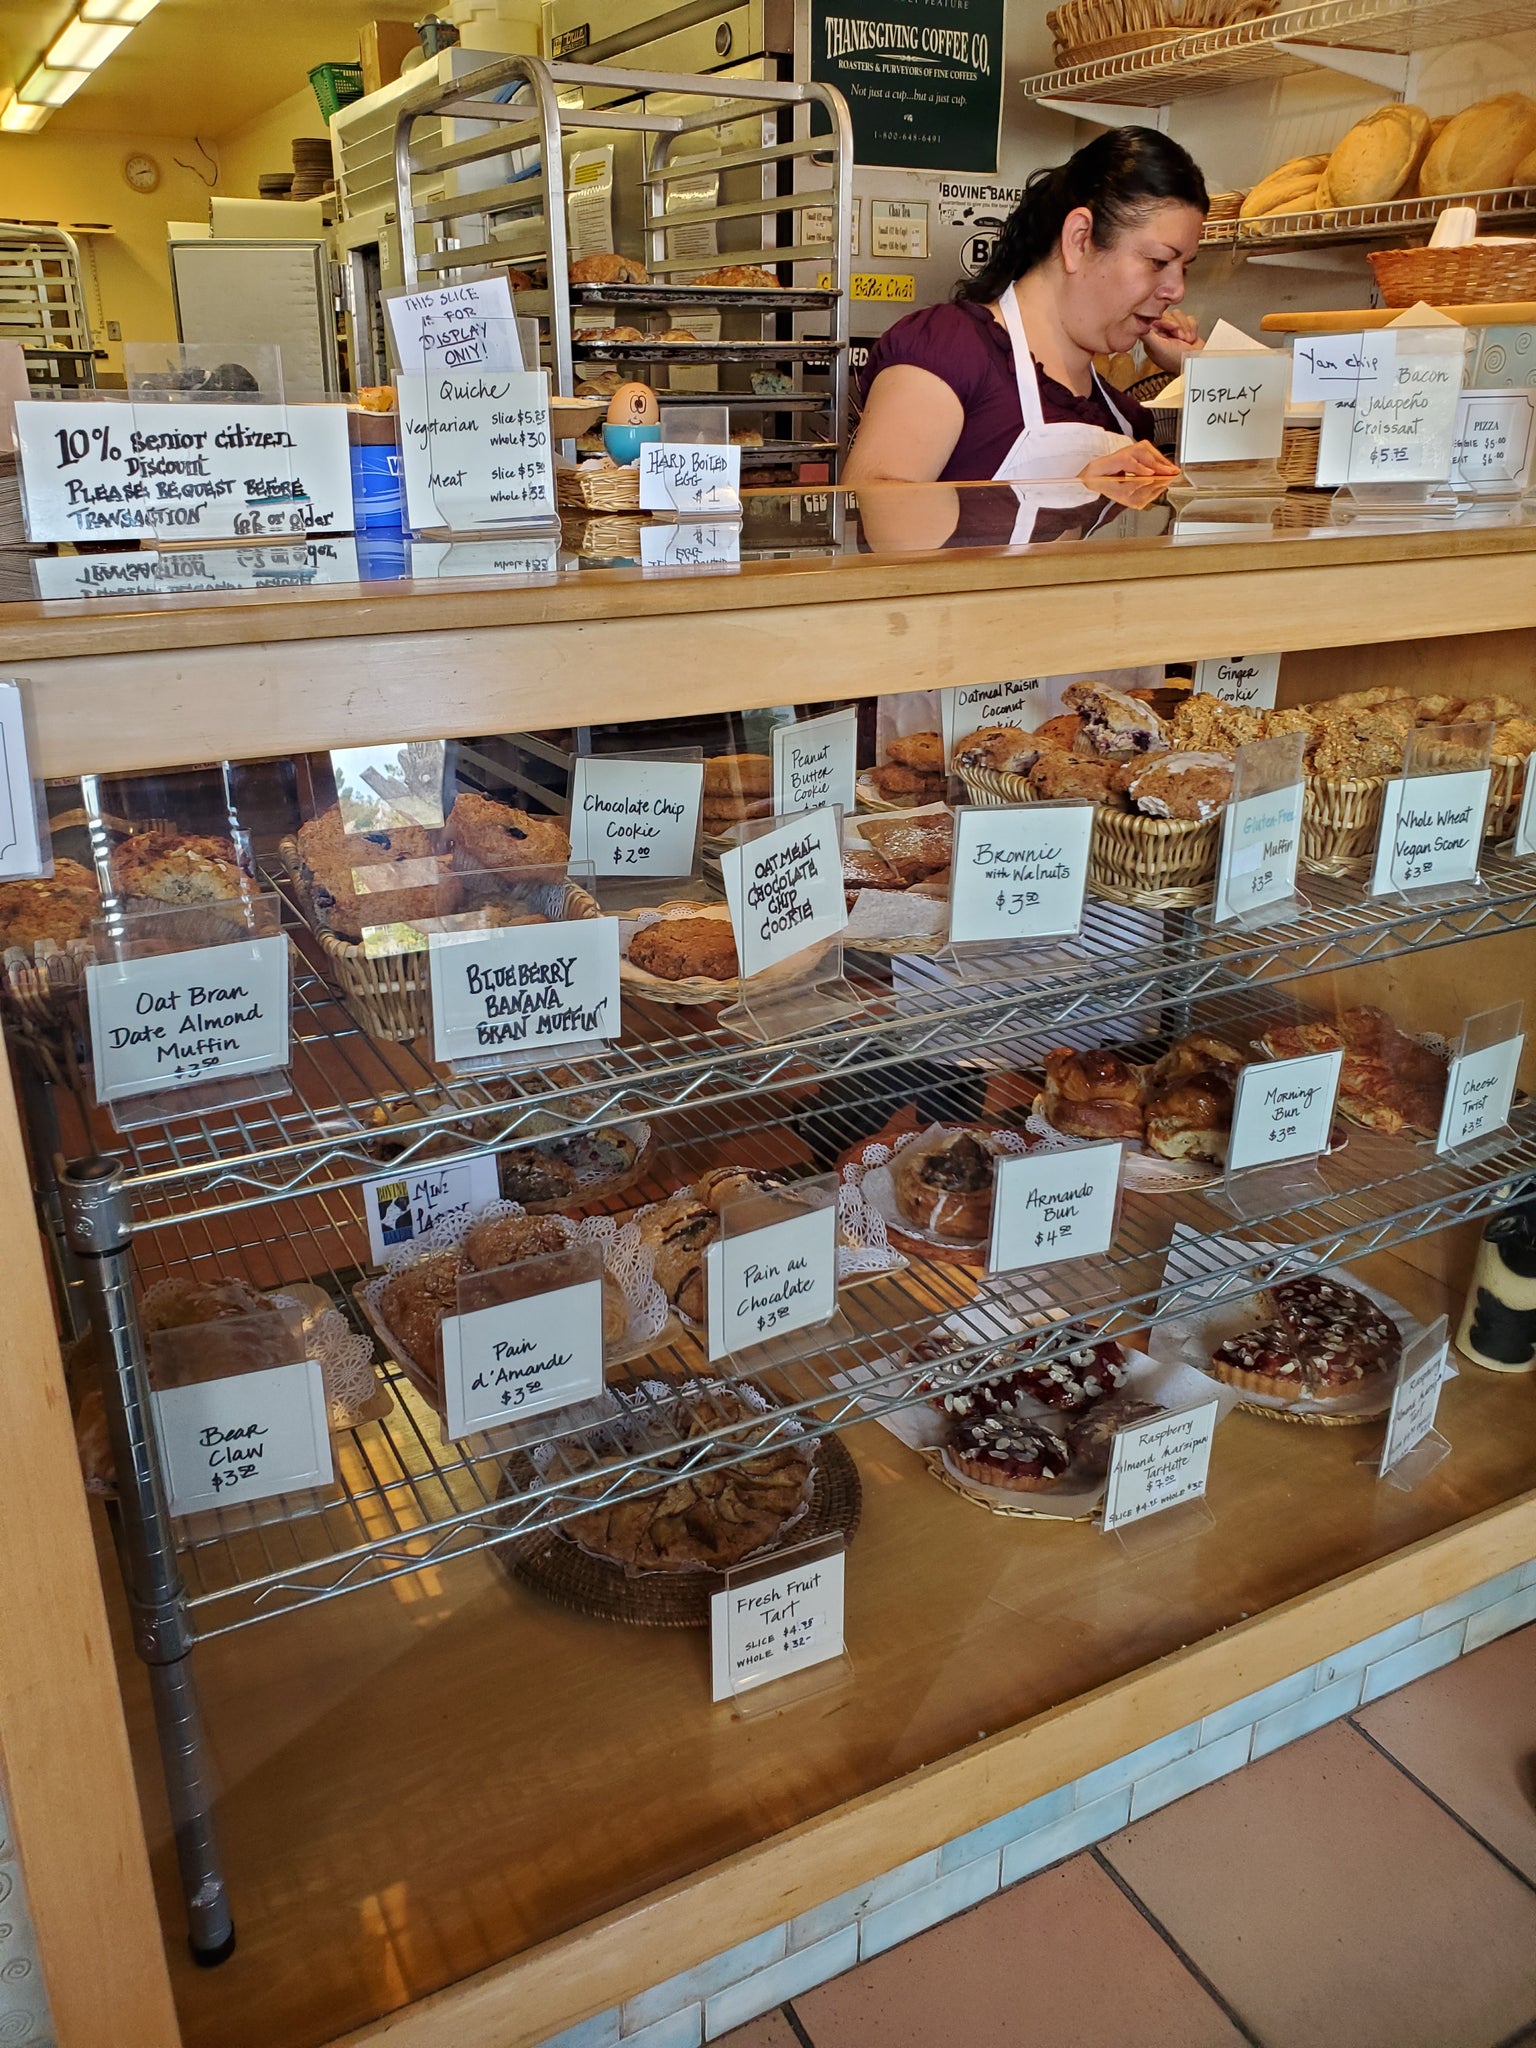 The pastry window at Bovine Bakery